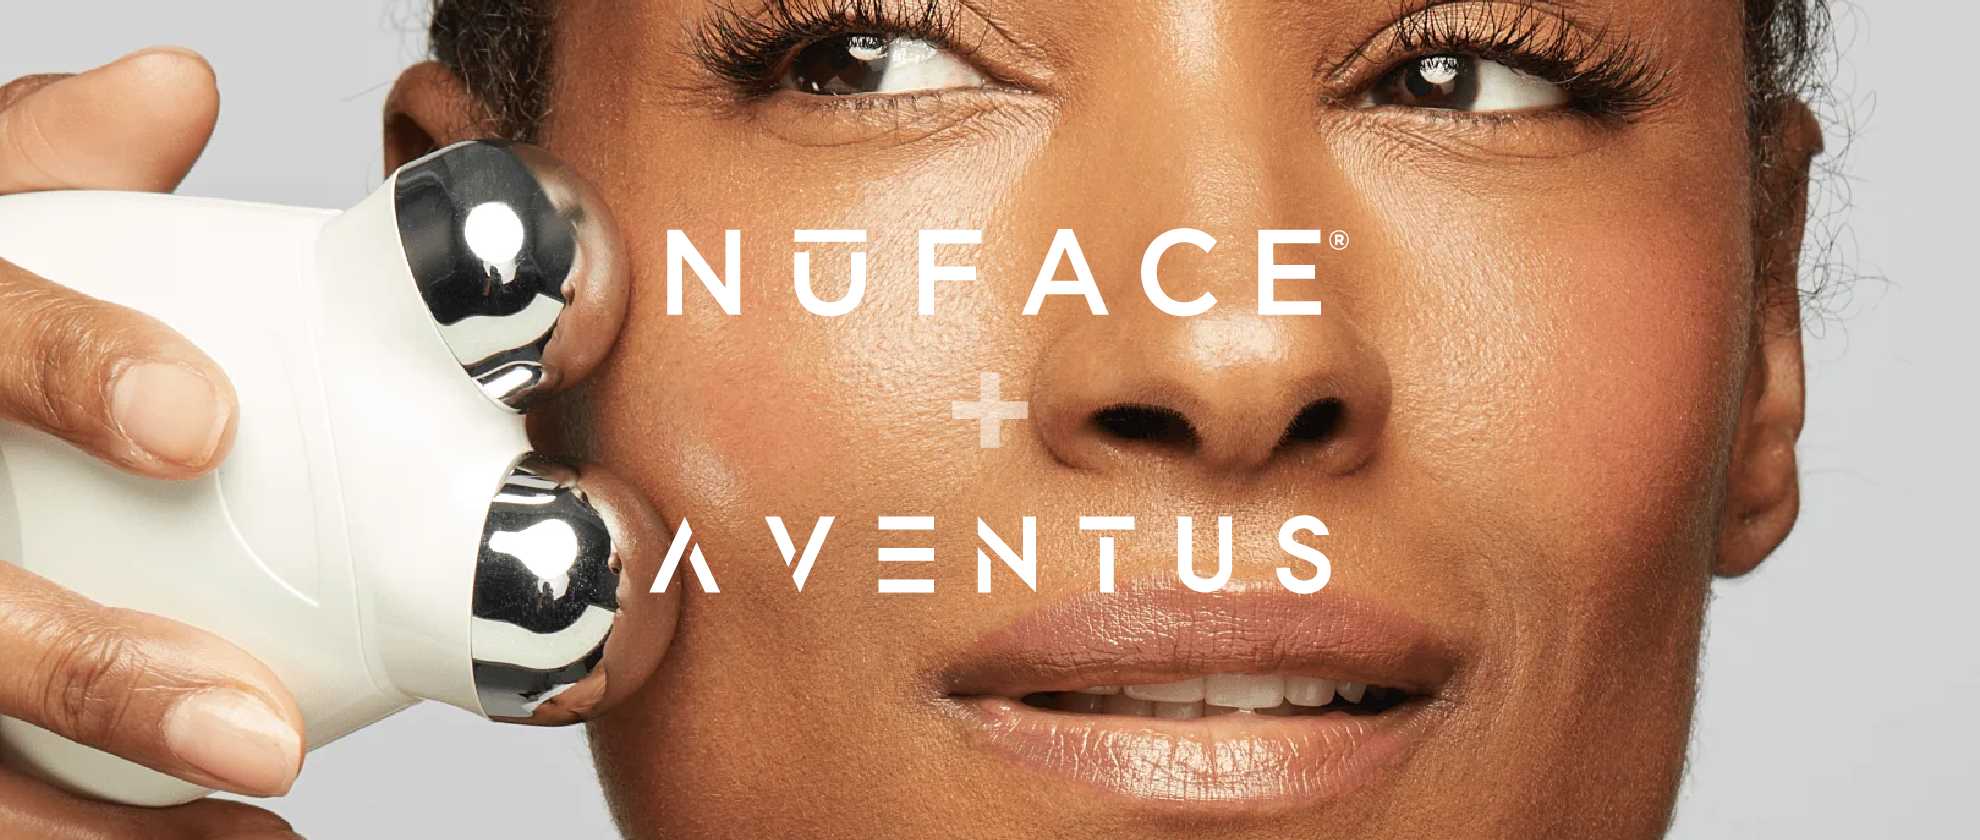 A beautiful woman with great skin operates one of NuFACE's microcurrent devices.